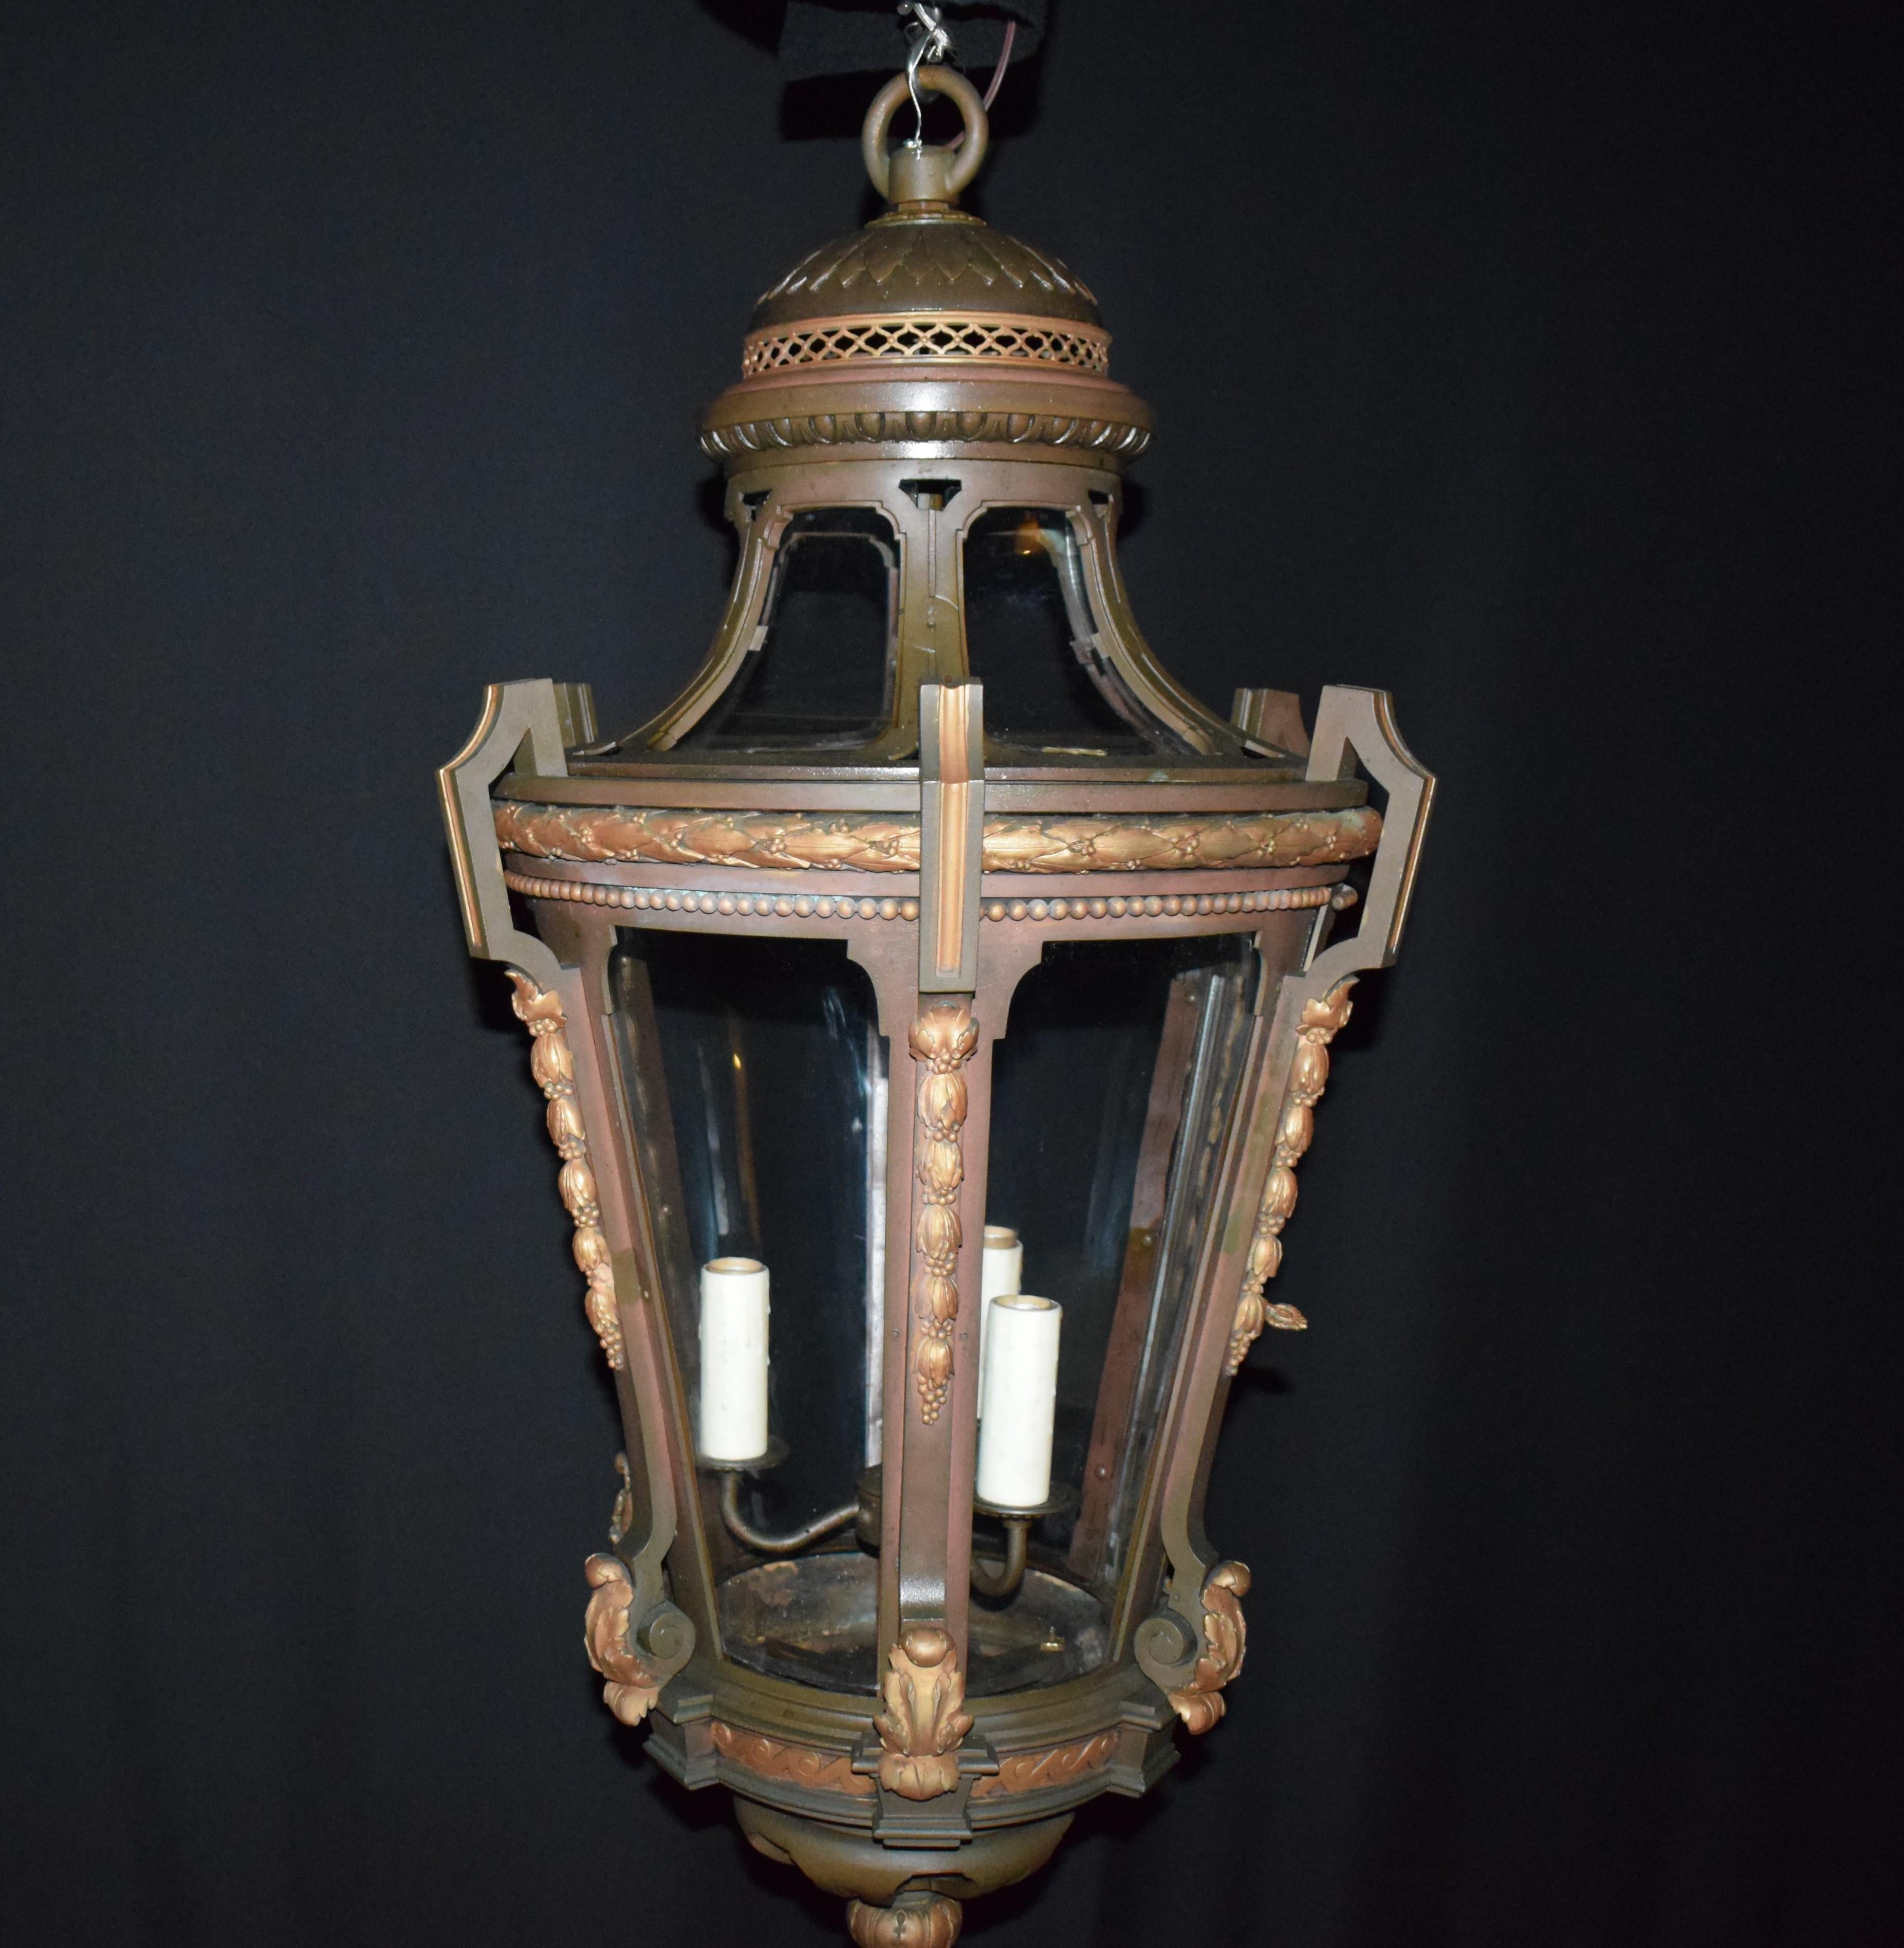 A superb Louis WVI style lantern. Two toned patinated bronze, with curved glass panels. 3-light,
France, circa 1900.
Apparently unmarked. Measures: Height 42